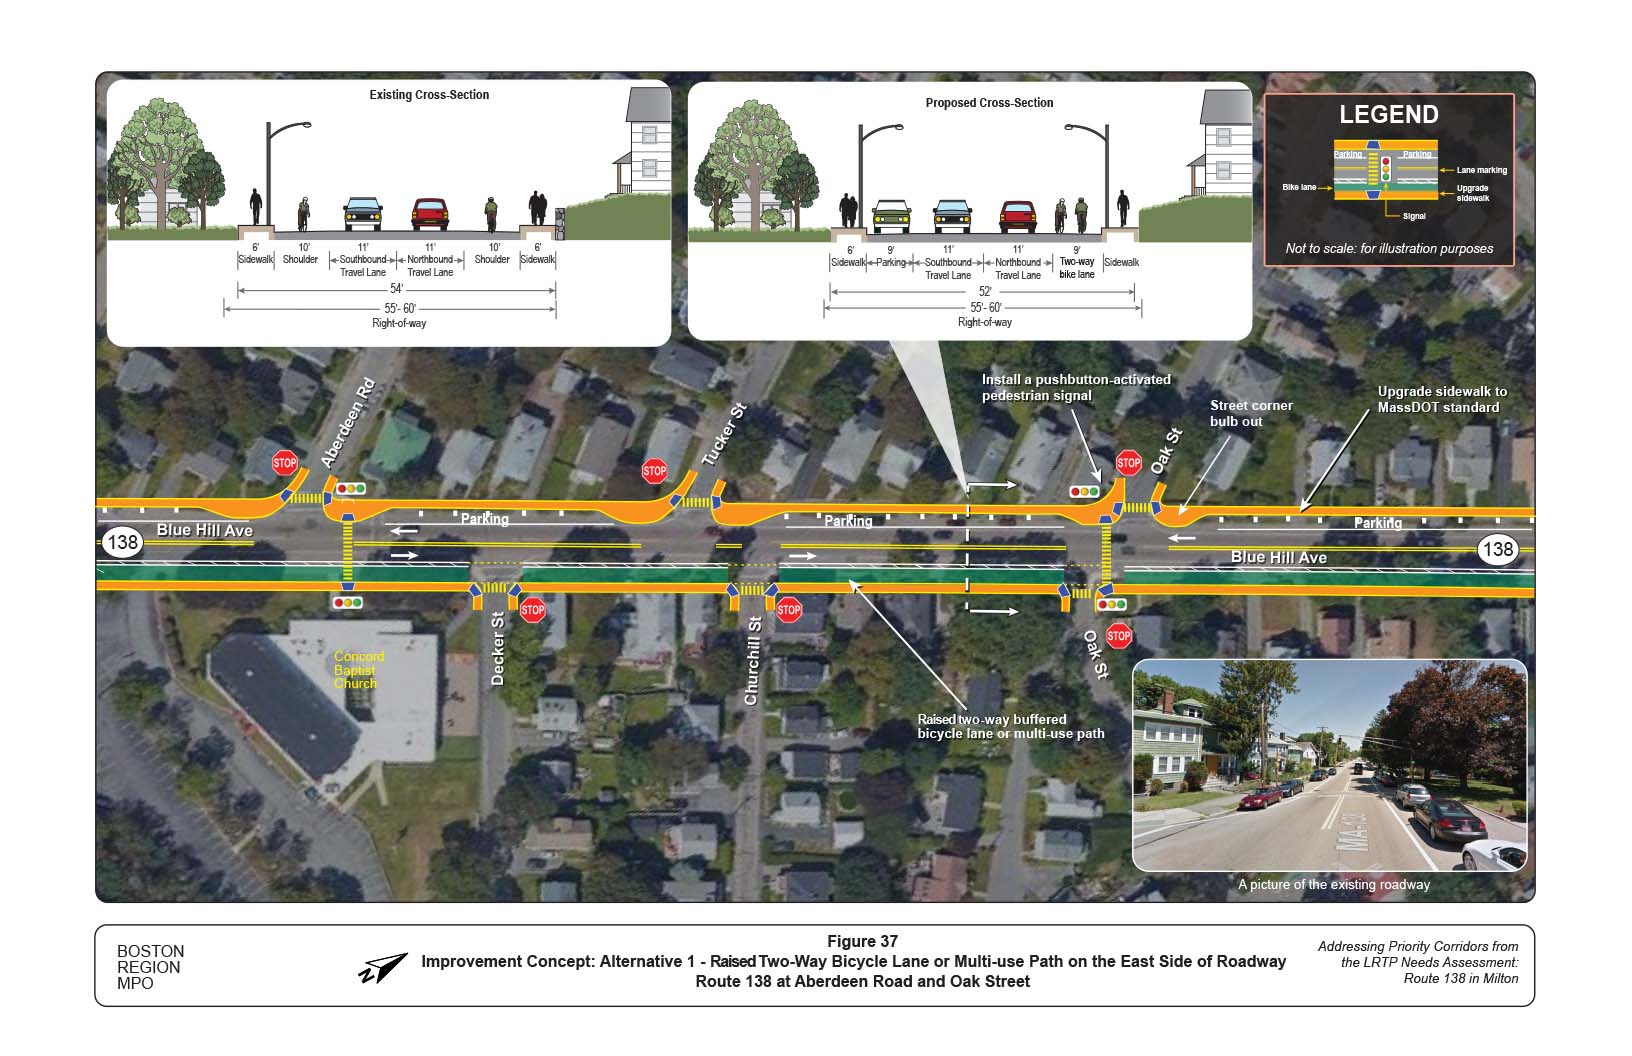 Figure 37 is an aerial photo of Route 138 at Aberdeen Road and Oak Street showing Alternative 1, two-way bicycle lane on the east side of the roadway, on-street parking on the west side, and overlays showing the existing and proposed cross-sections.